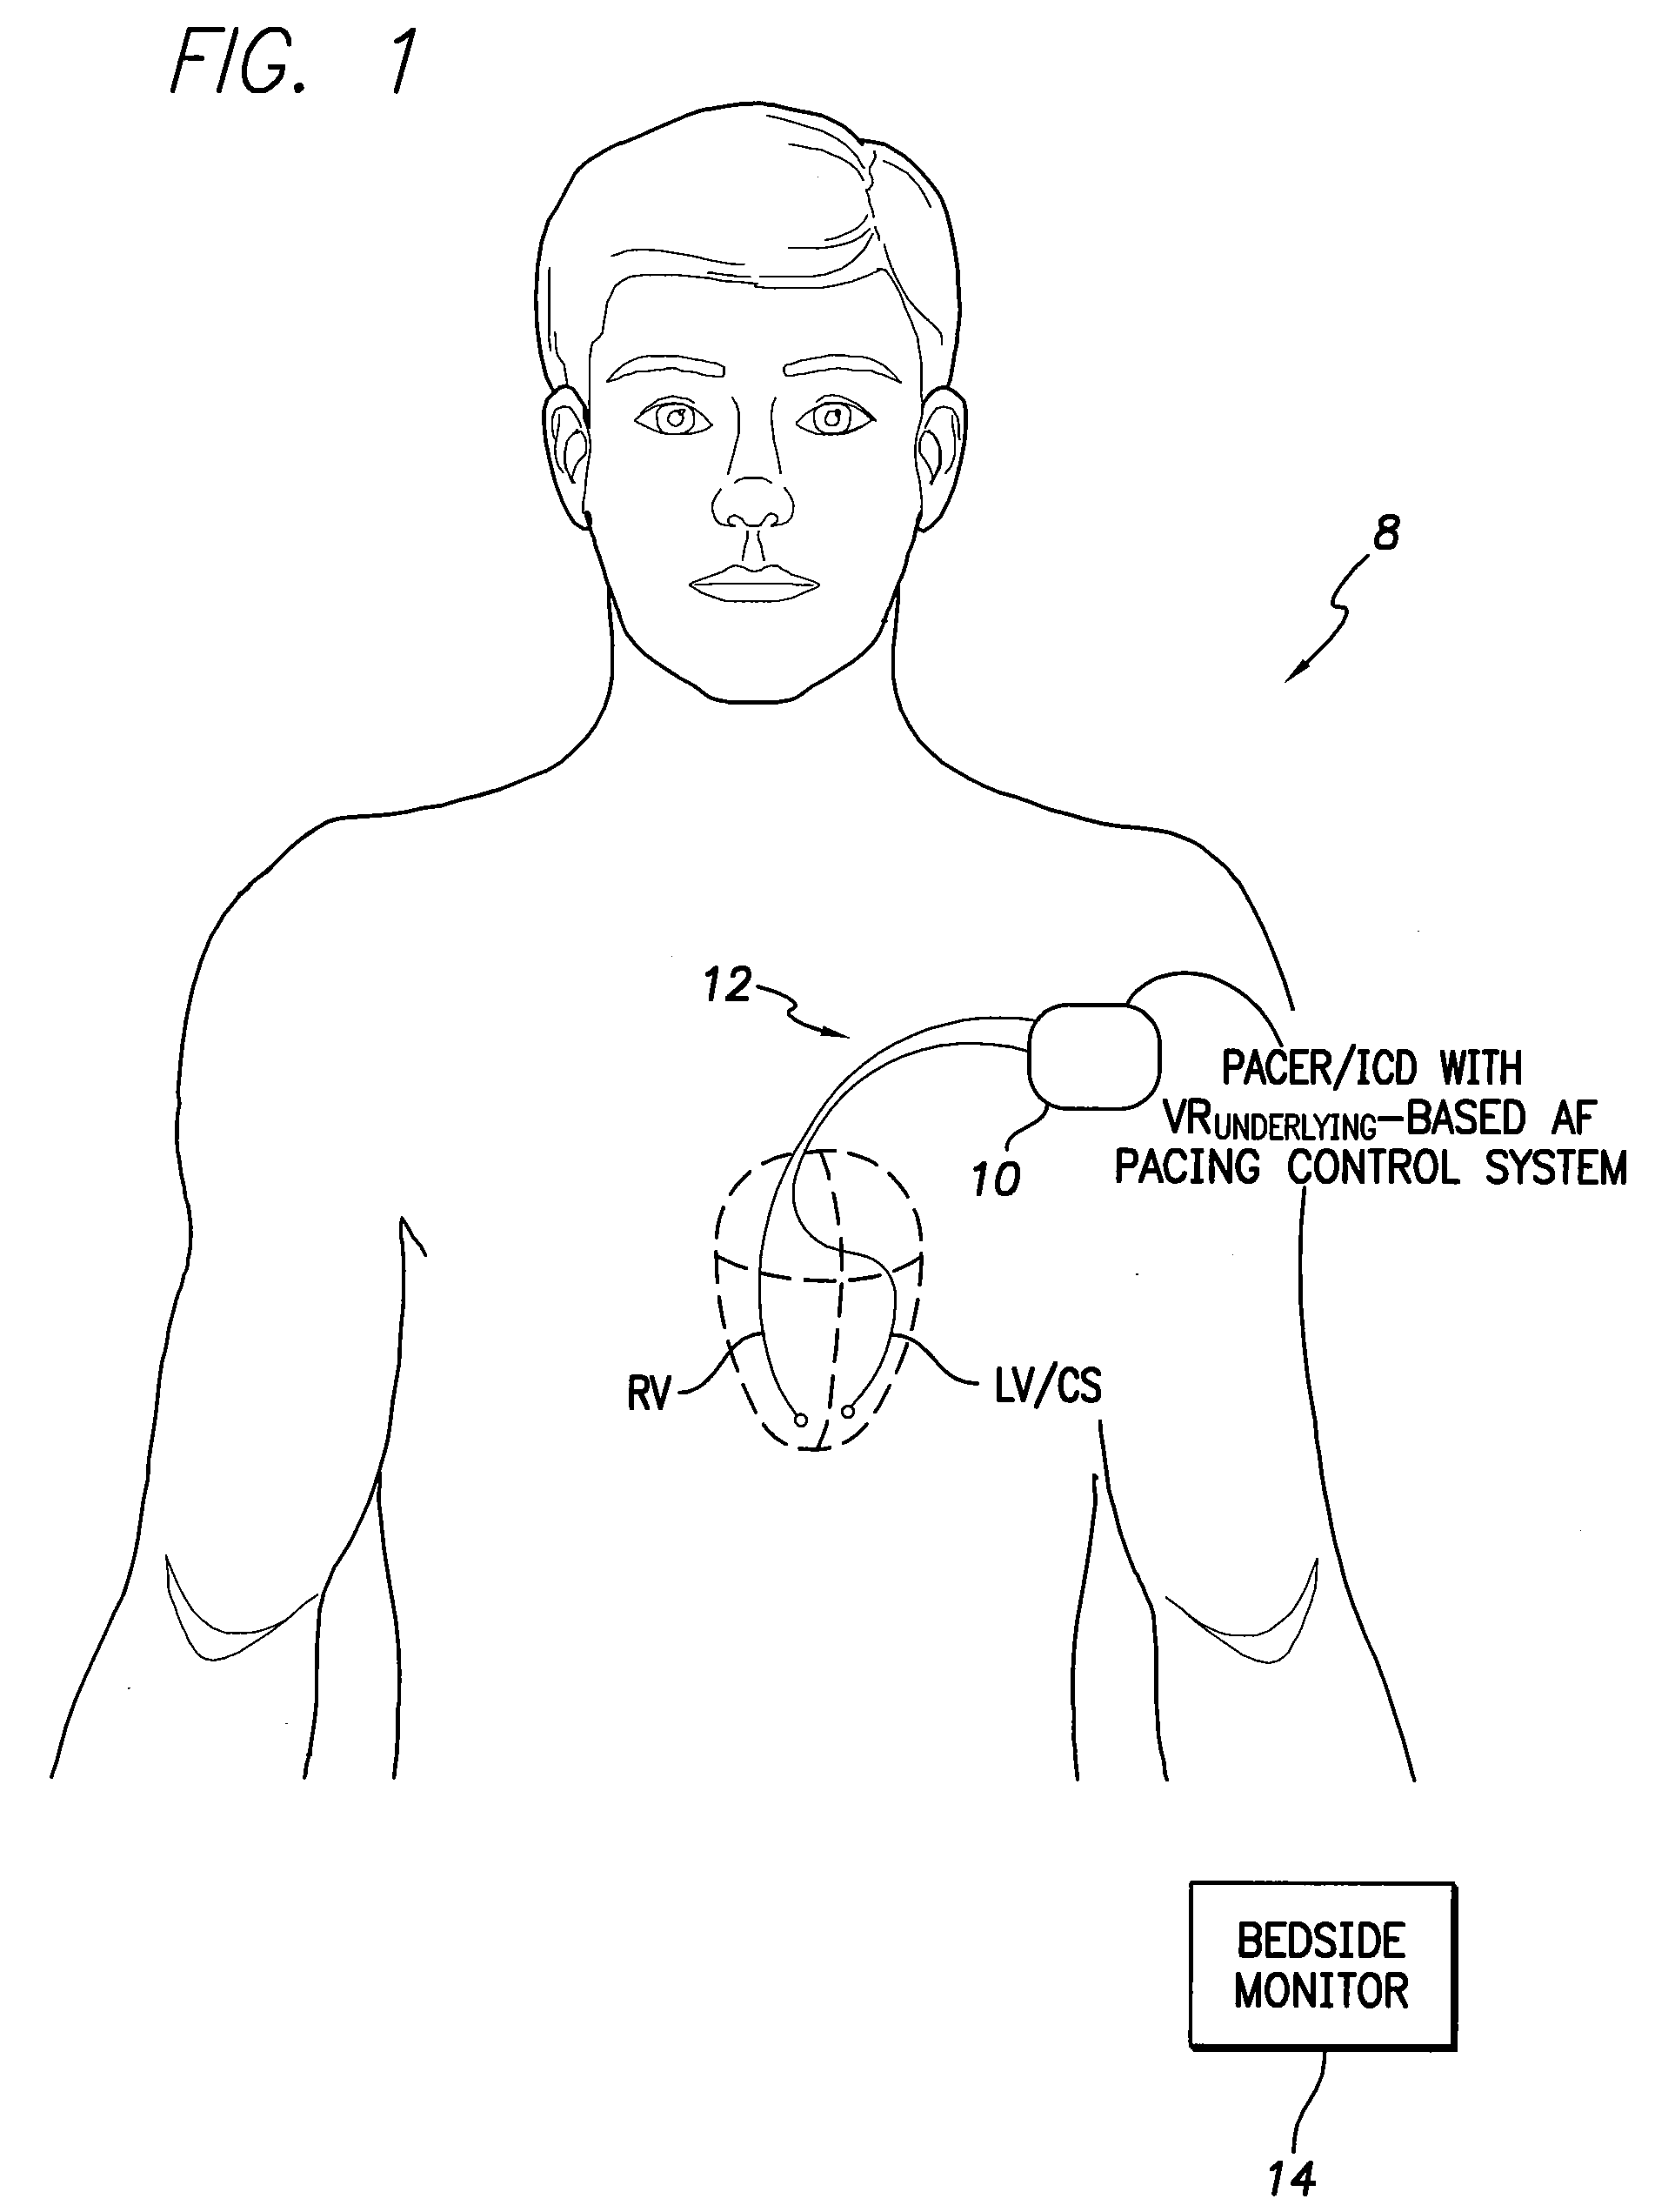 System and Method for Controlling Ventricular Pacing During AF Based on Underlying Ventricular Rates Using an Implantable Medical Device